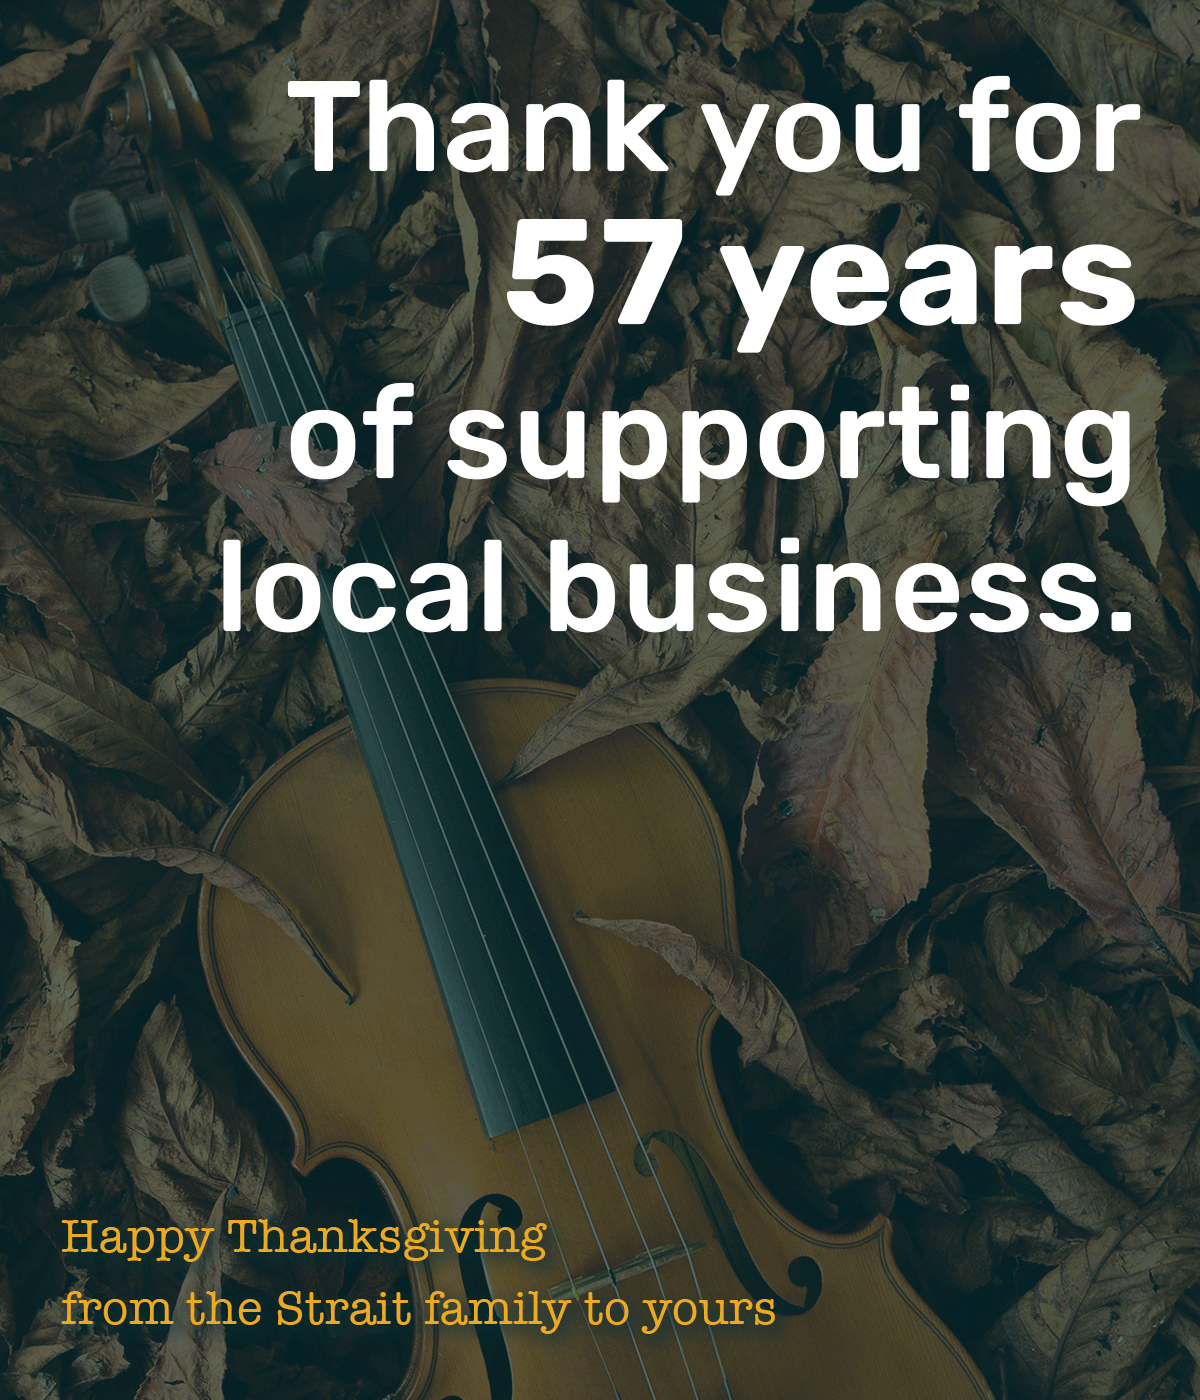 Thank you for 57 years of supporting small business. Happy Thanksgiving from the Strait family to yours.